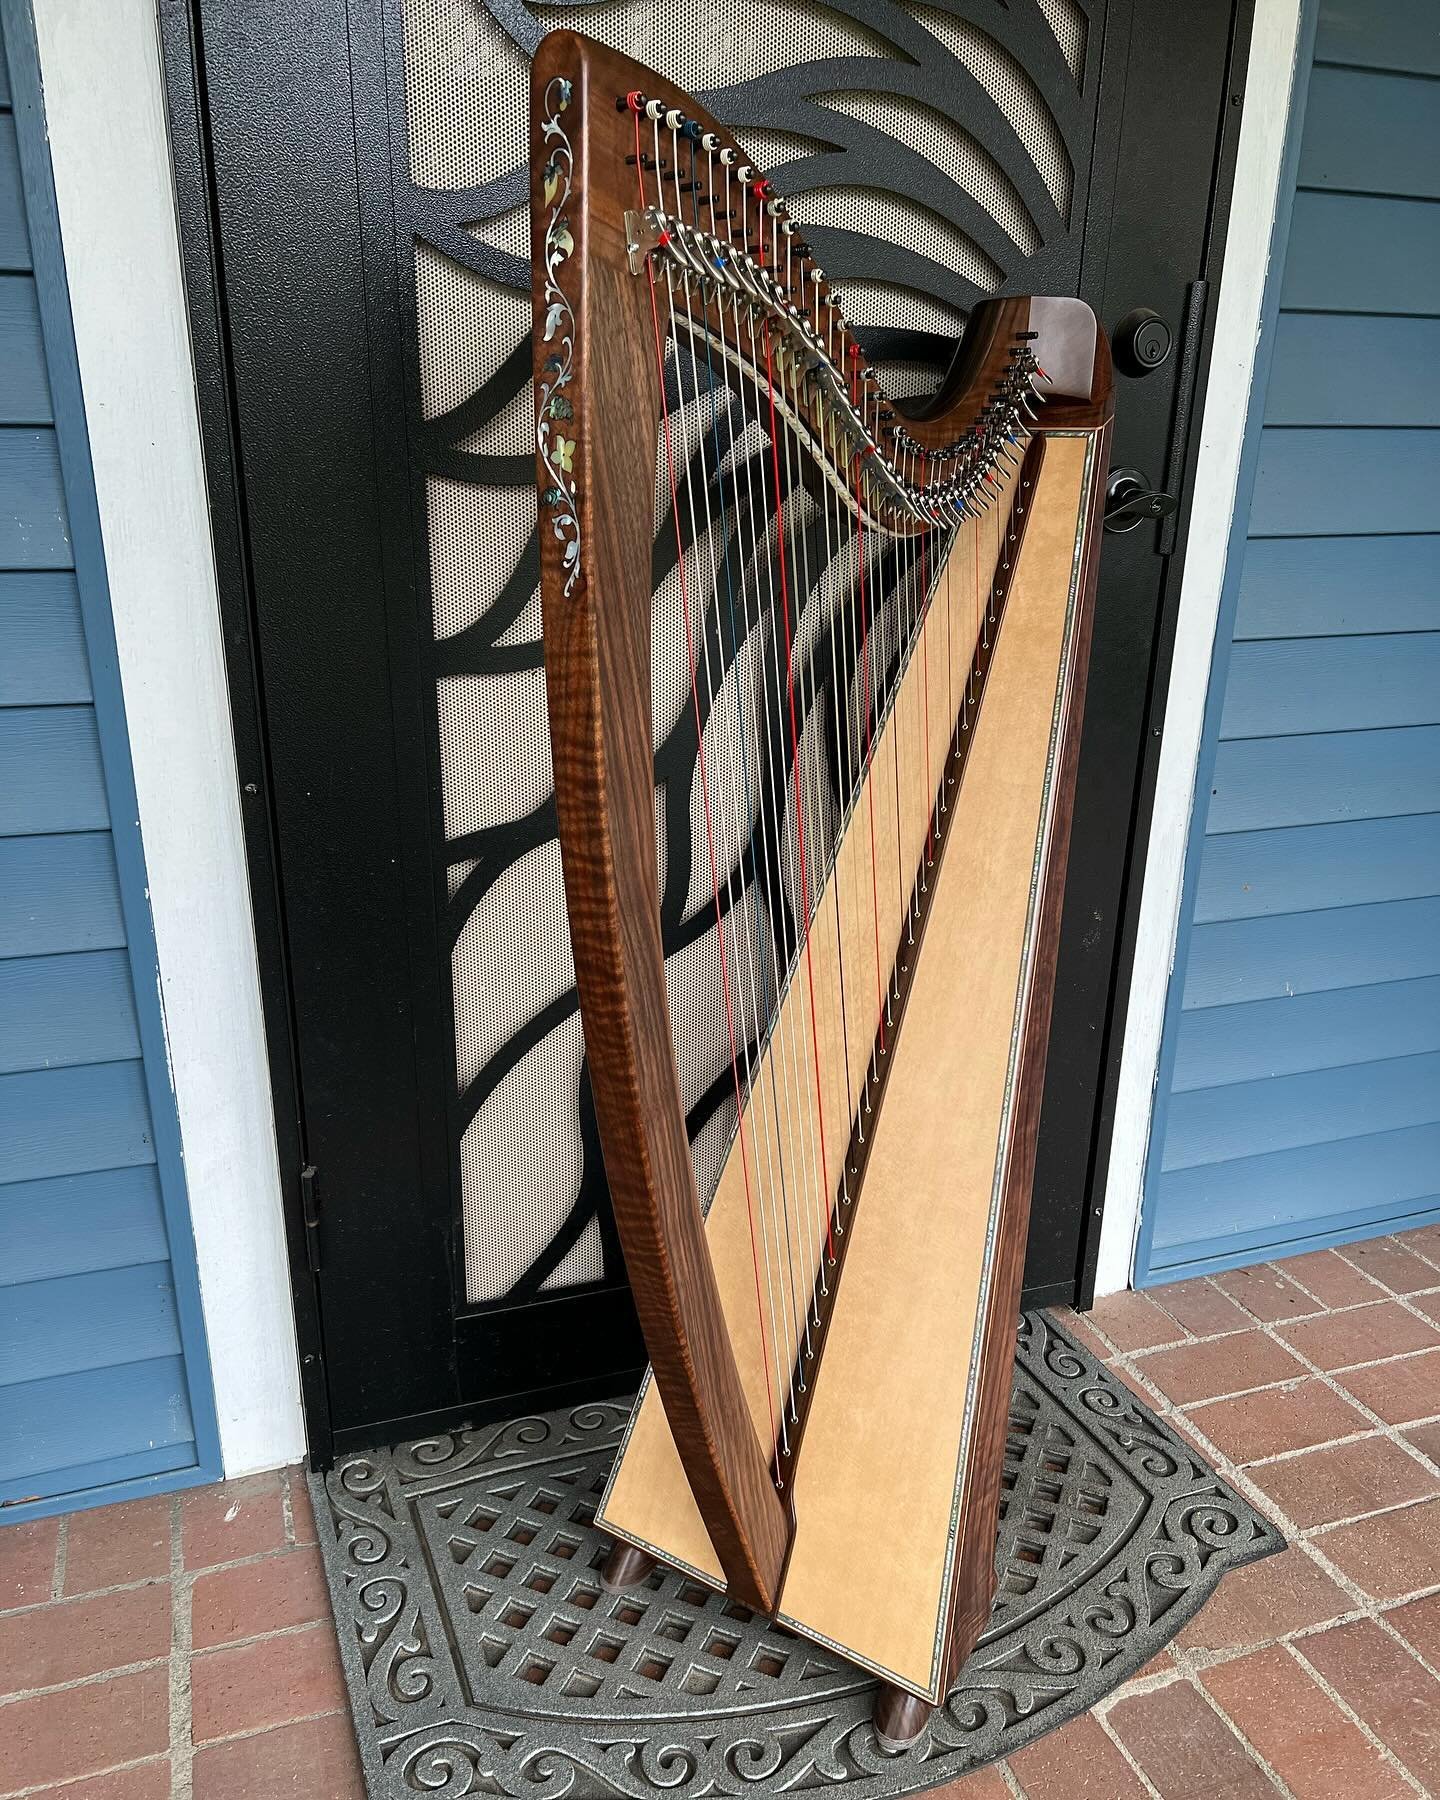 Gotcha day! 😍💖🎵
For the first time since I was 9 years old, I have a new harp that is *mine*! Not for my studio or to be a rental&hellip; just for me to play and love. 
The Thormahlens built this absolutely stunning Cygnet and I couldn&rsquo;t be 